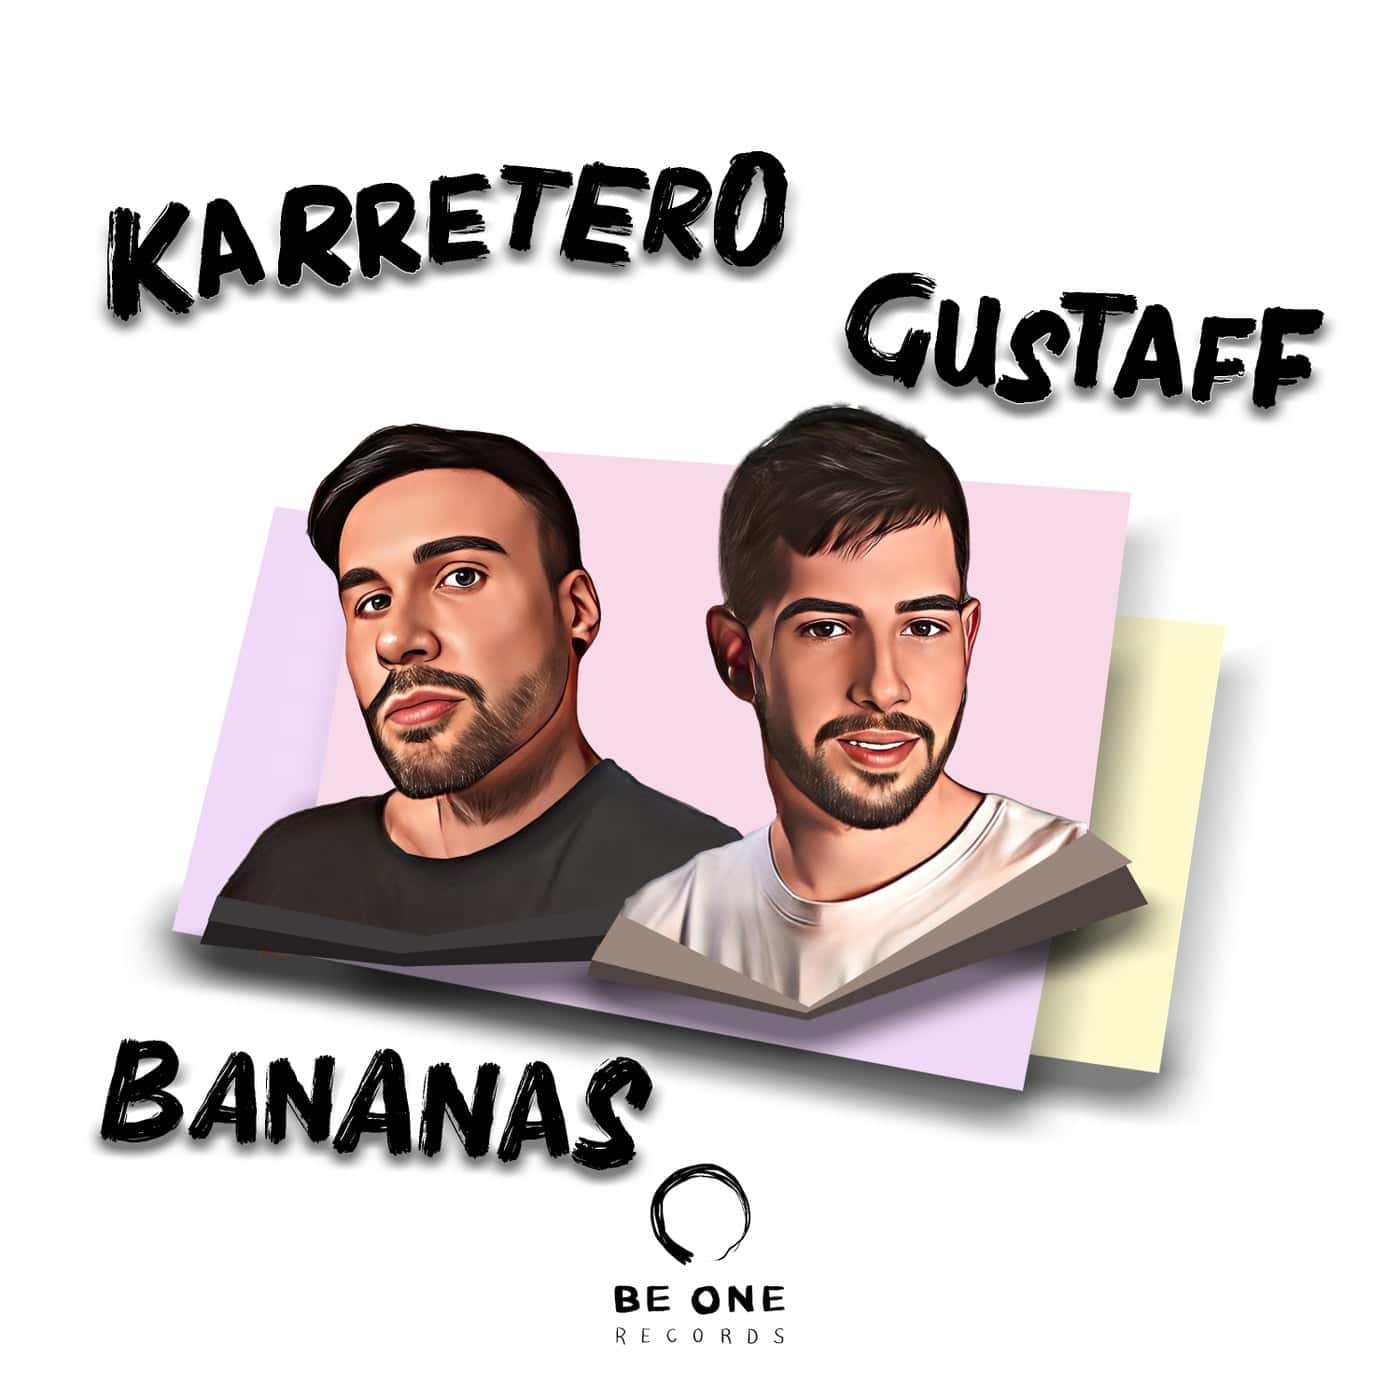 image cover: Bananas by Karretero, Gustaff on Be One Records